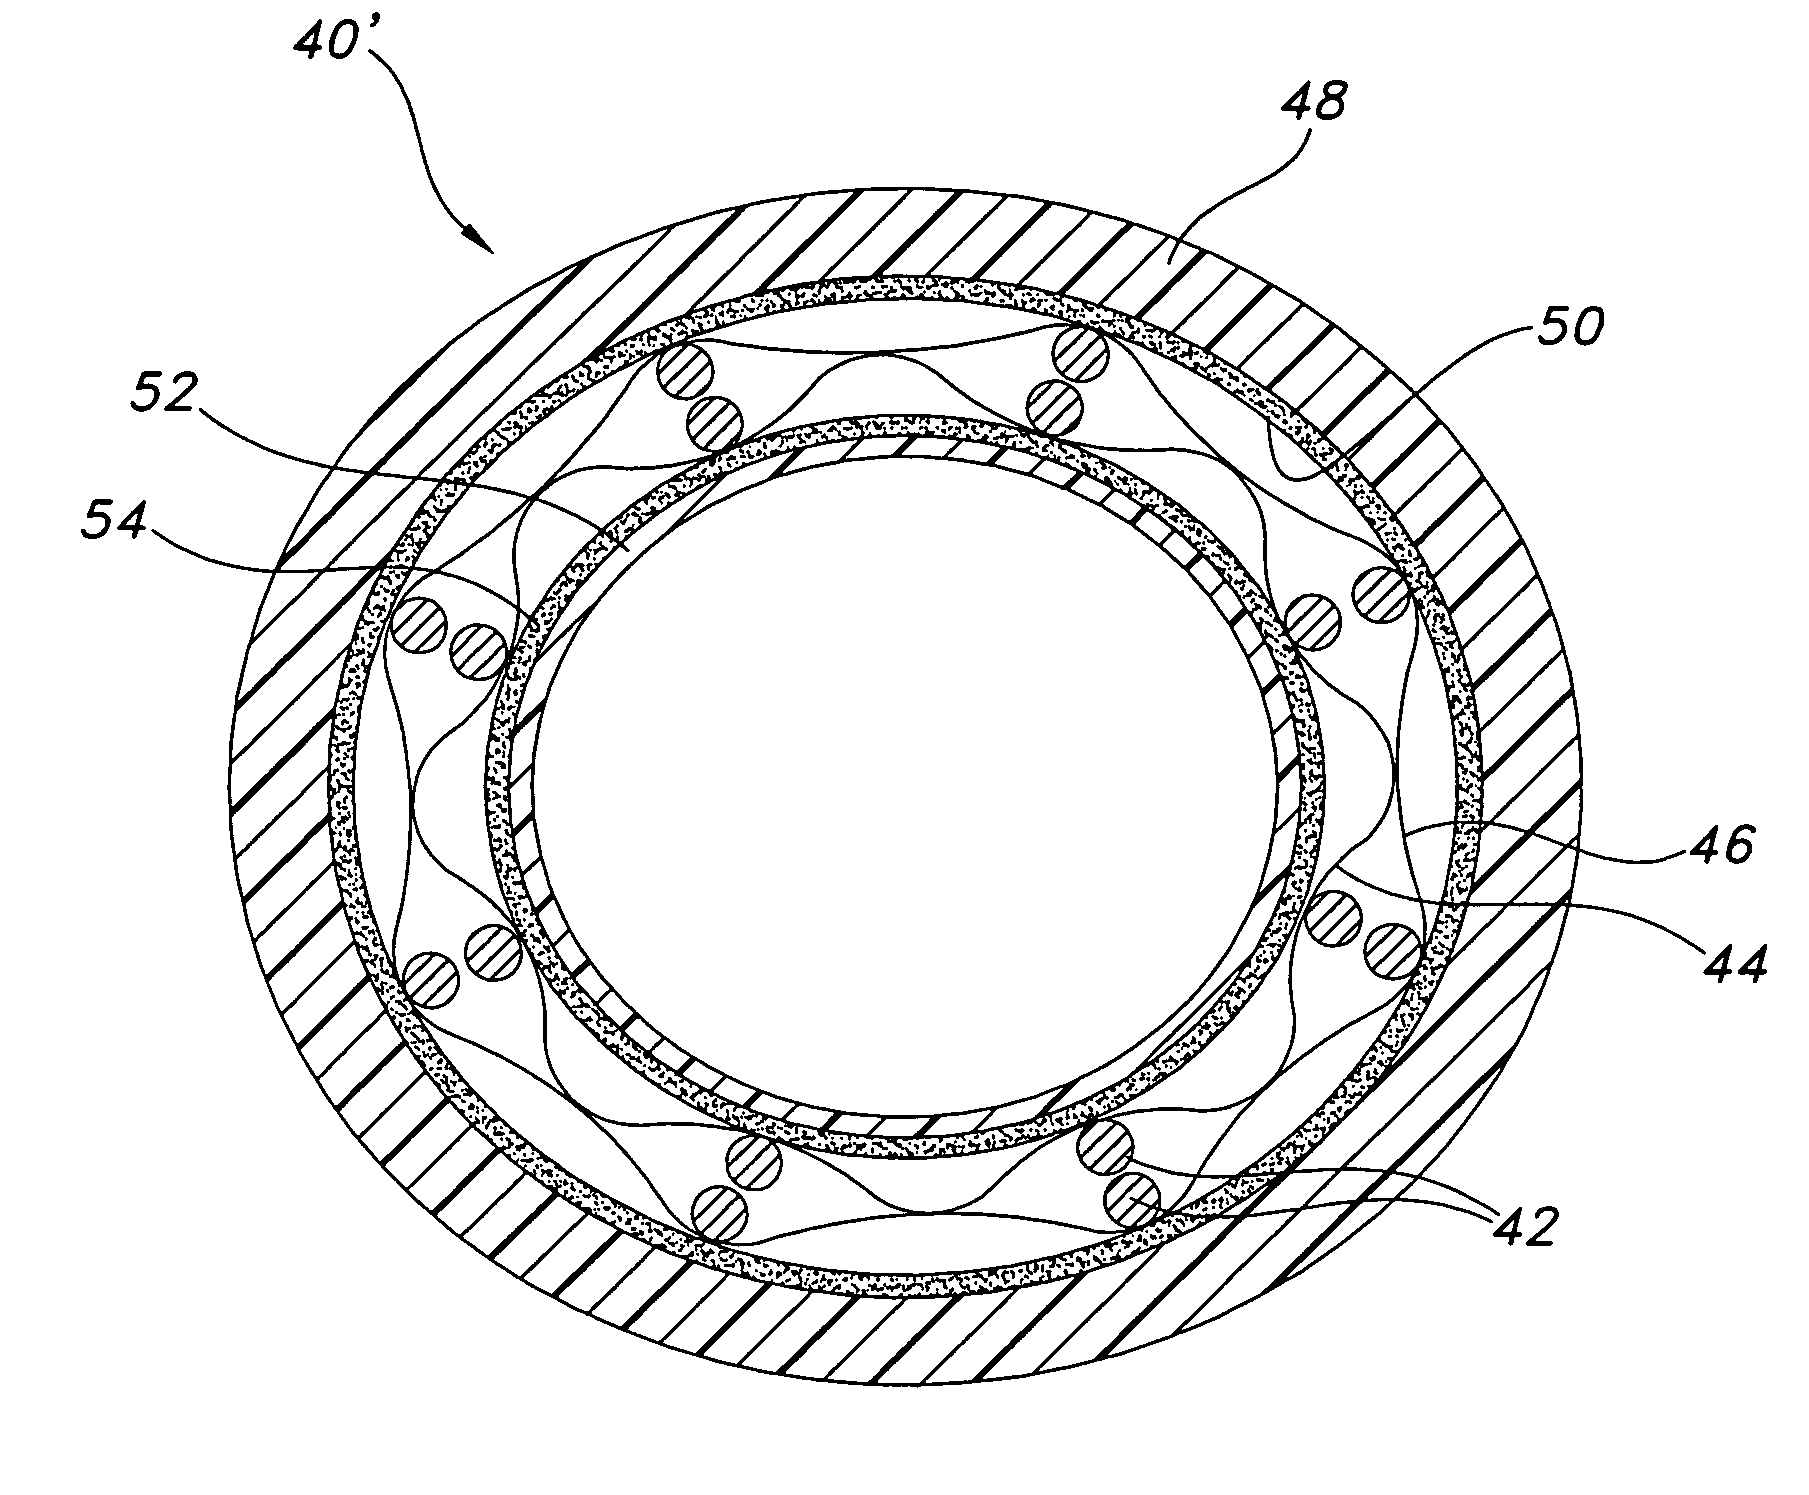 Pressure lamination method for forming composite ePTFE/textile and ePTFE/stent/textile prostheses